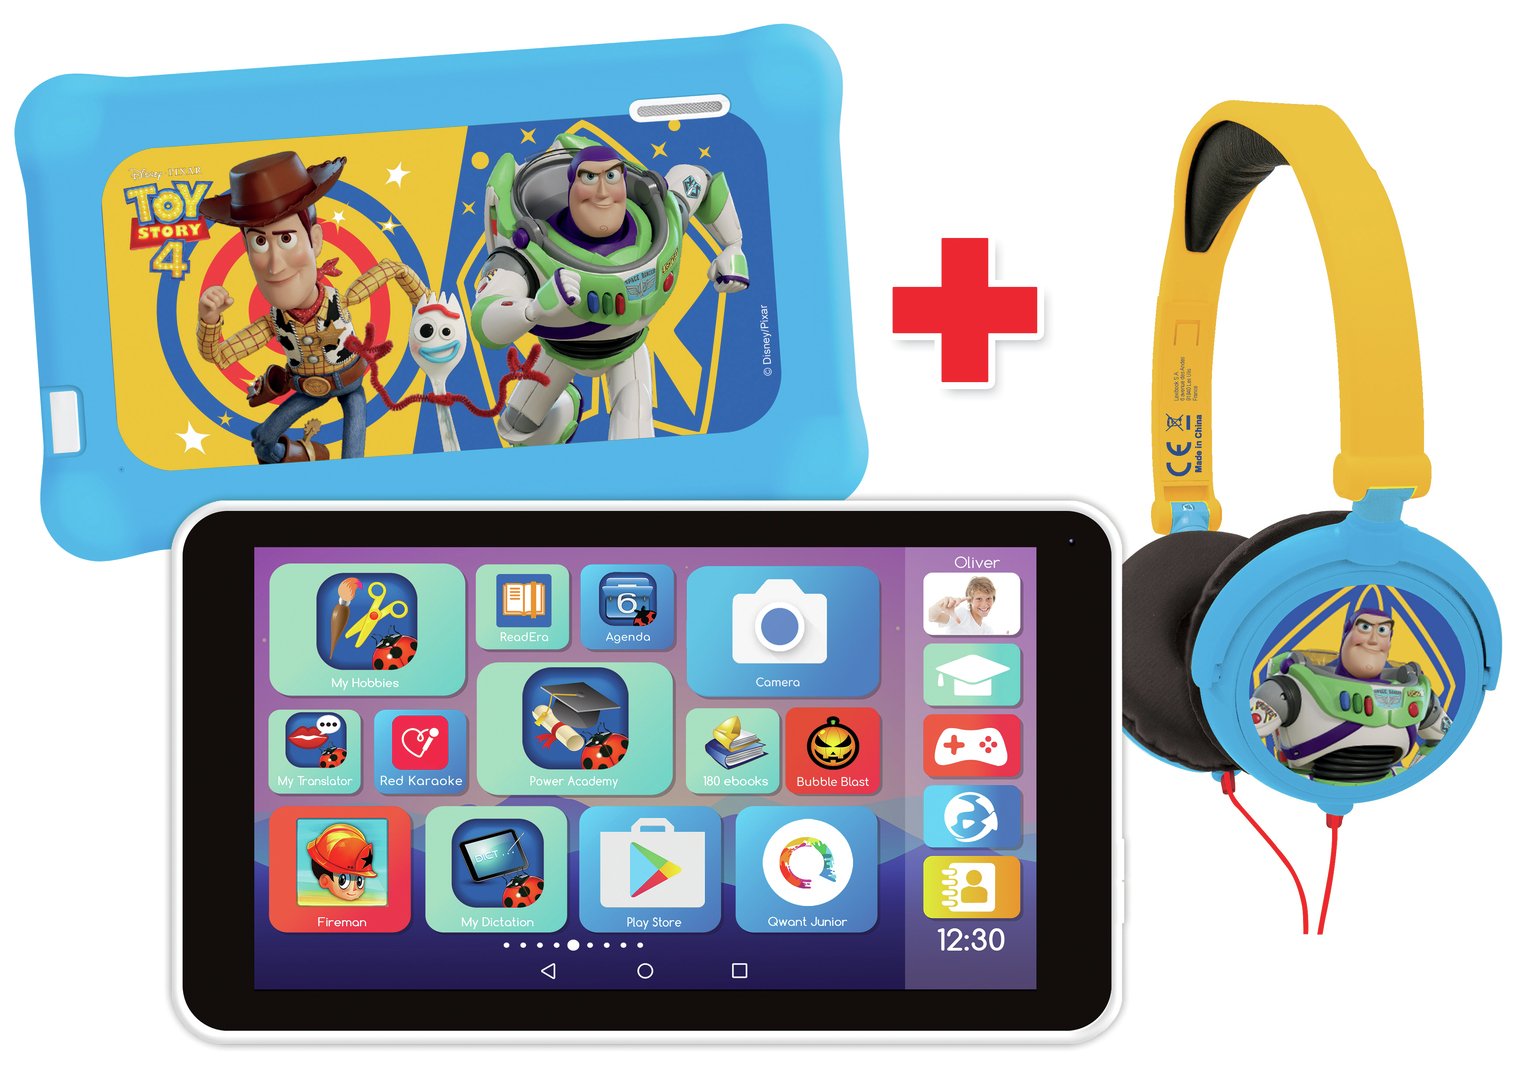 LexiTab Master with Toy Story 4 Pouch and Headphones.